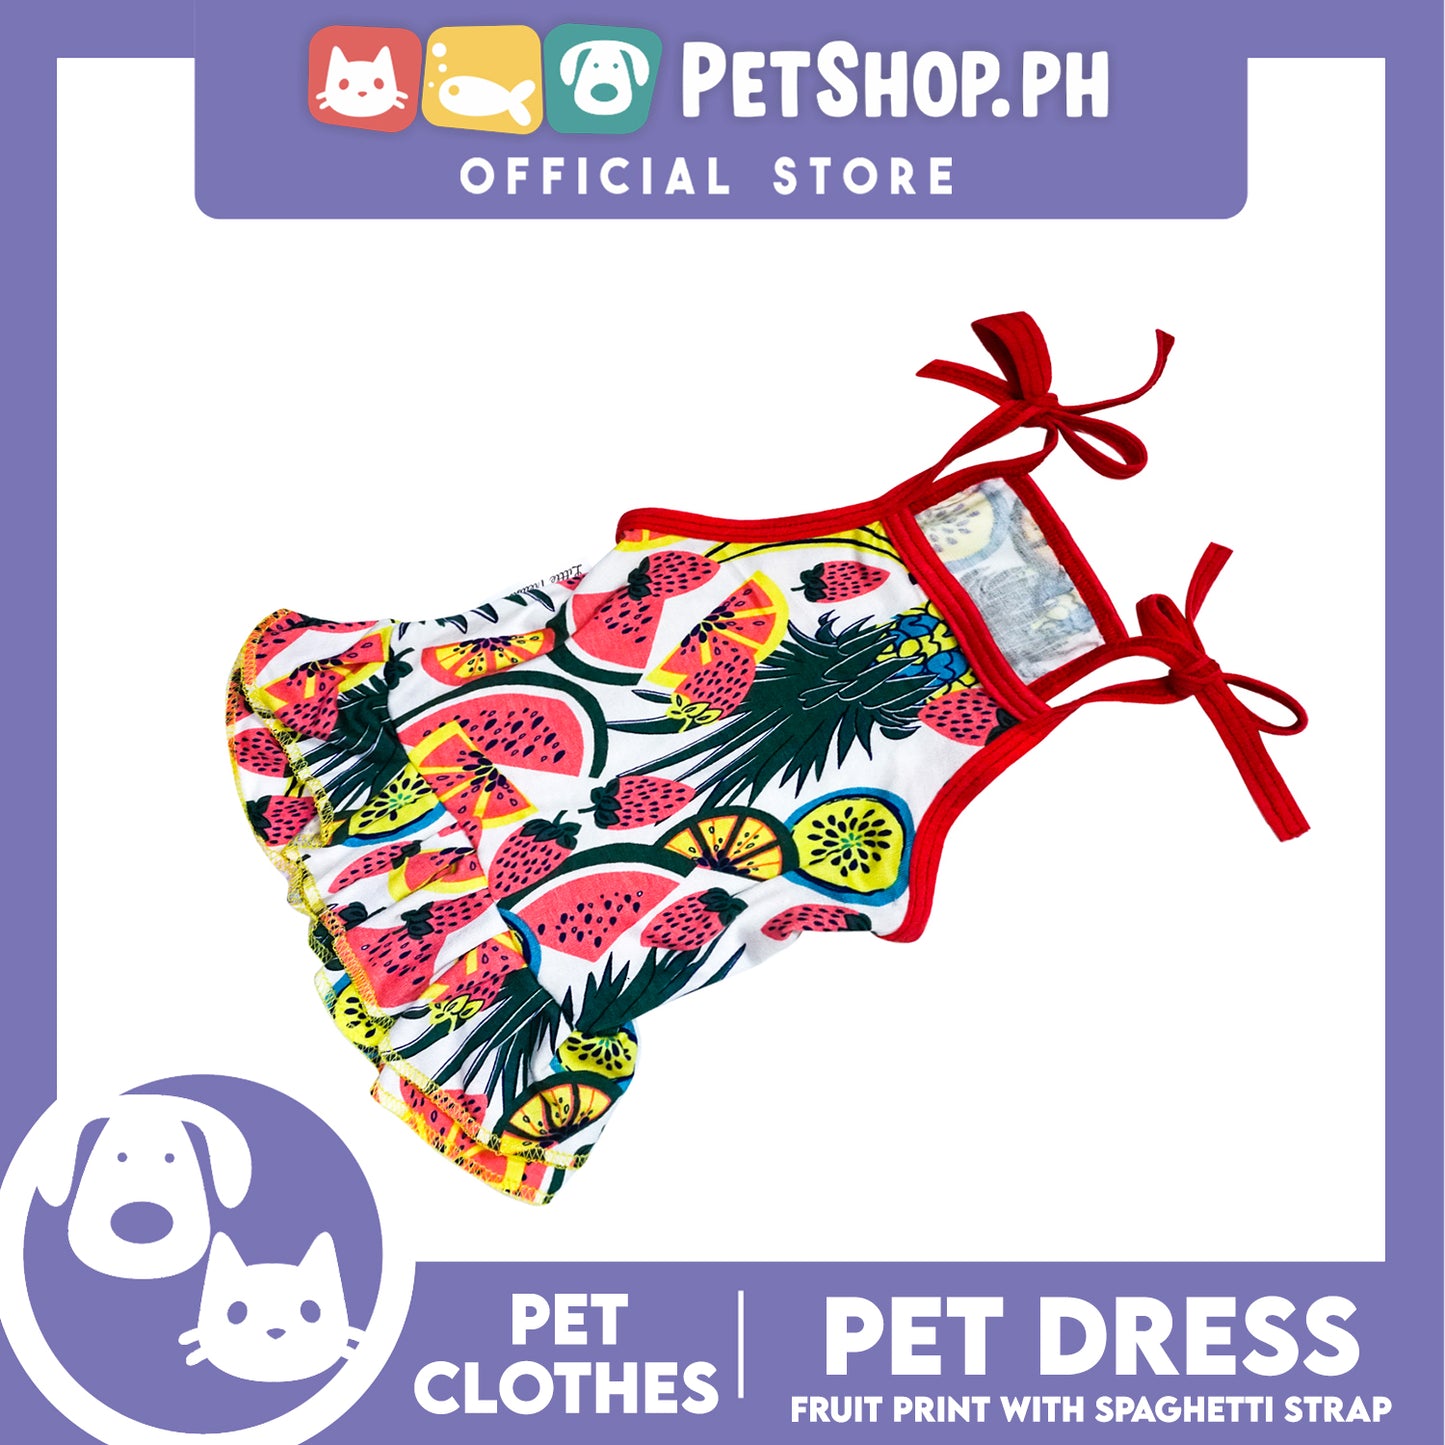 Pet Dress Fruit Print with Spaghetti Strap (Large) Pet Dress Clothes Perfect for Dogs